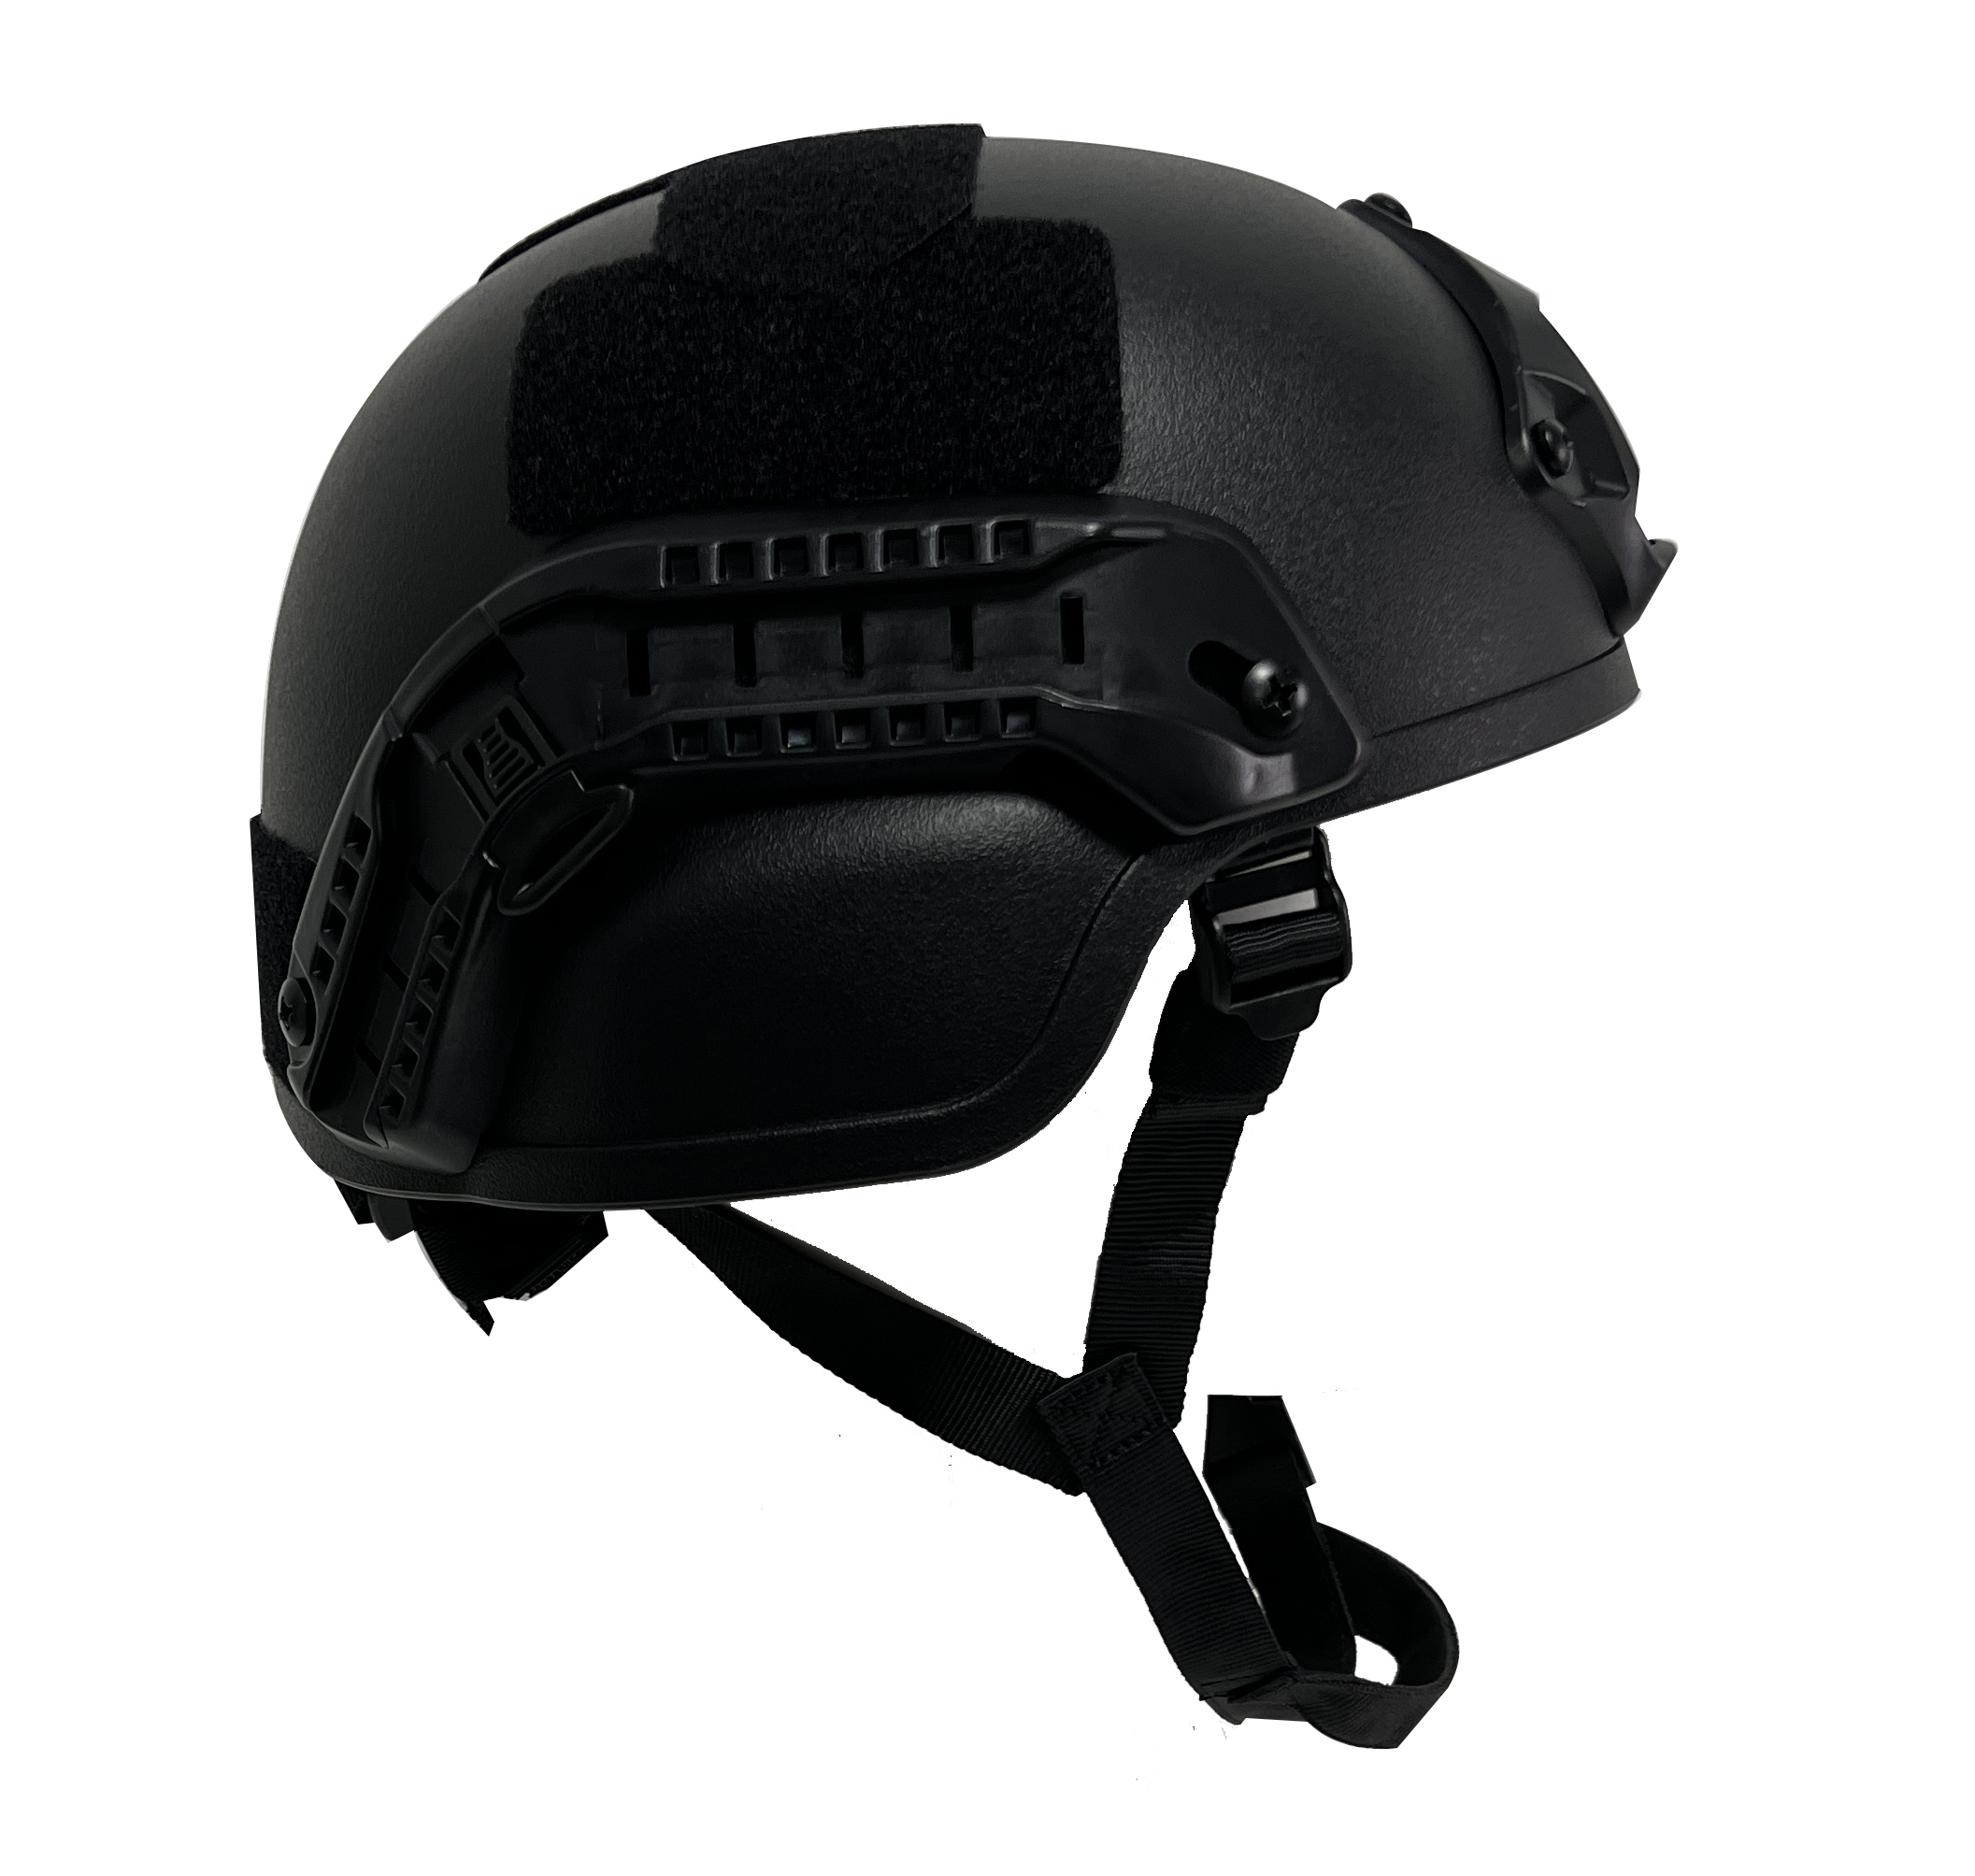 Police Military Protective ABS MICH Tactical Helmet